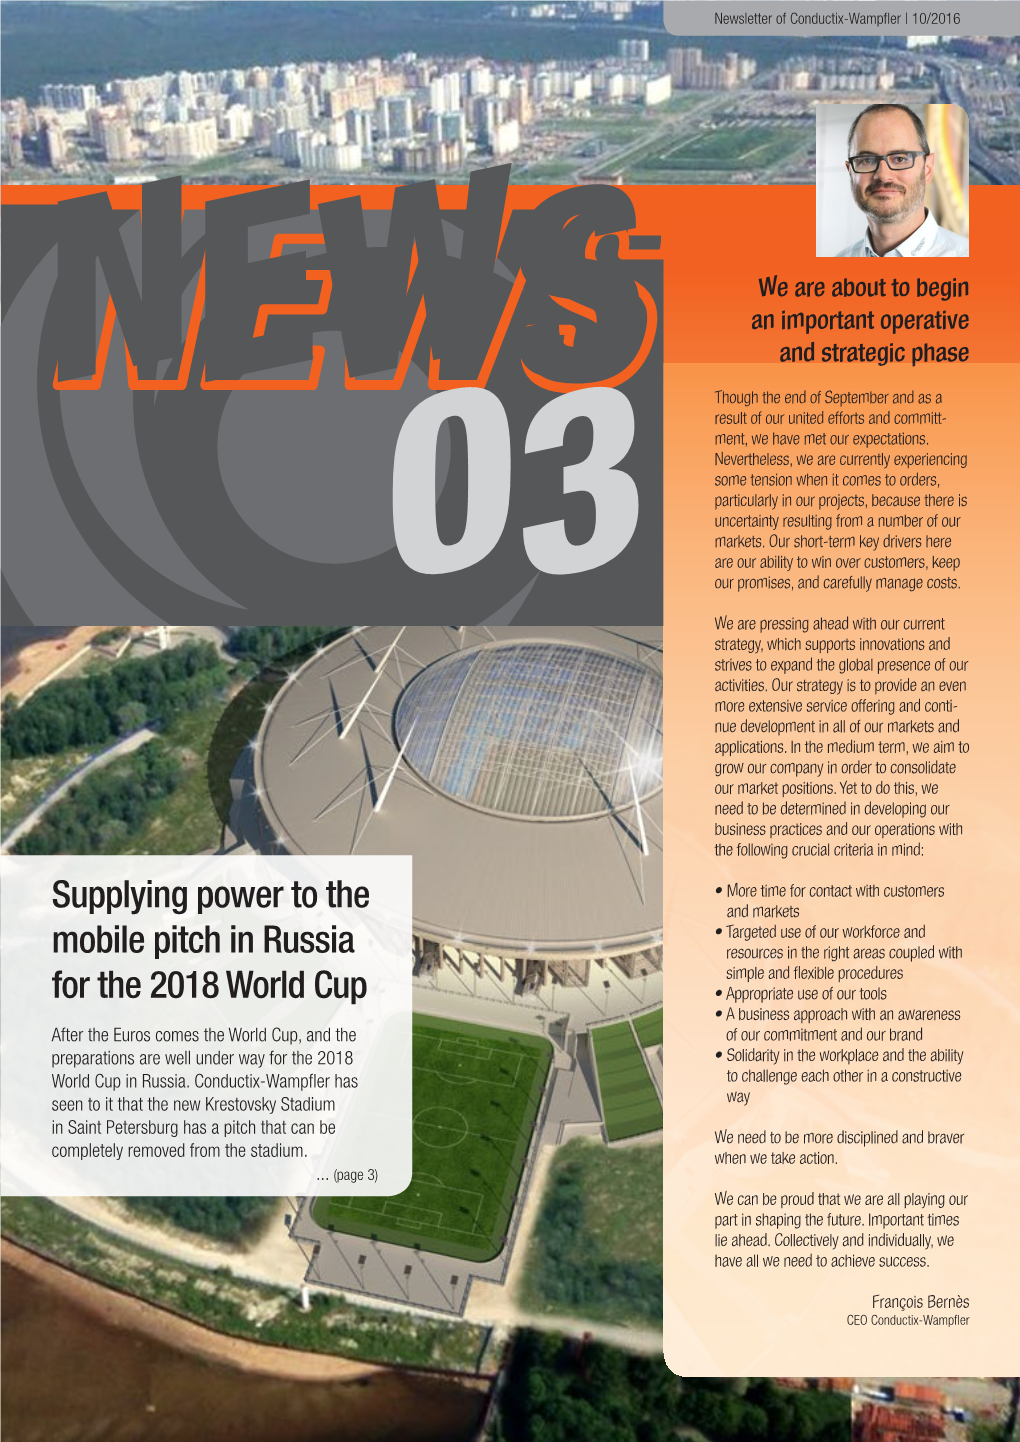 Supplying Power to the Mobile Pitch in Russia for the 2018 World Cup